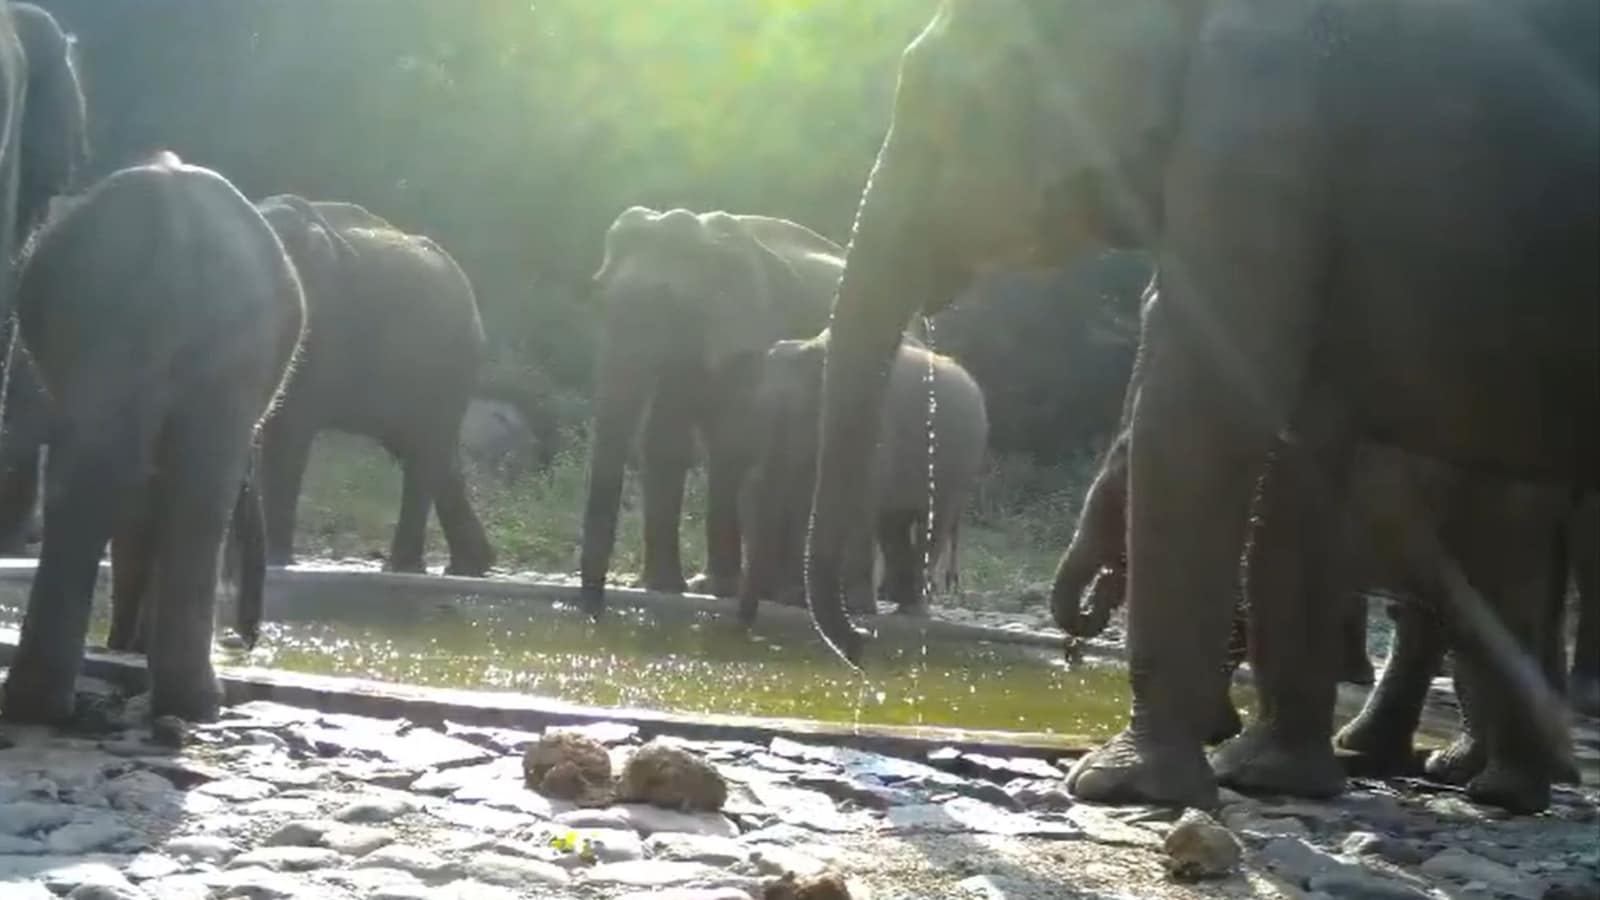 Elephant family ‘bonds over’ water trough in Tamil Nadu forest. Heartwarming scene captured on camera